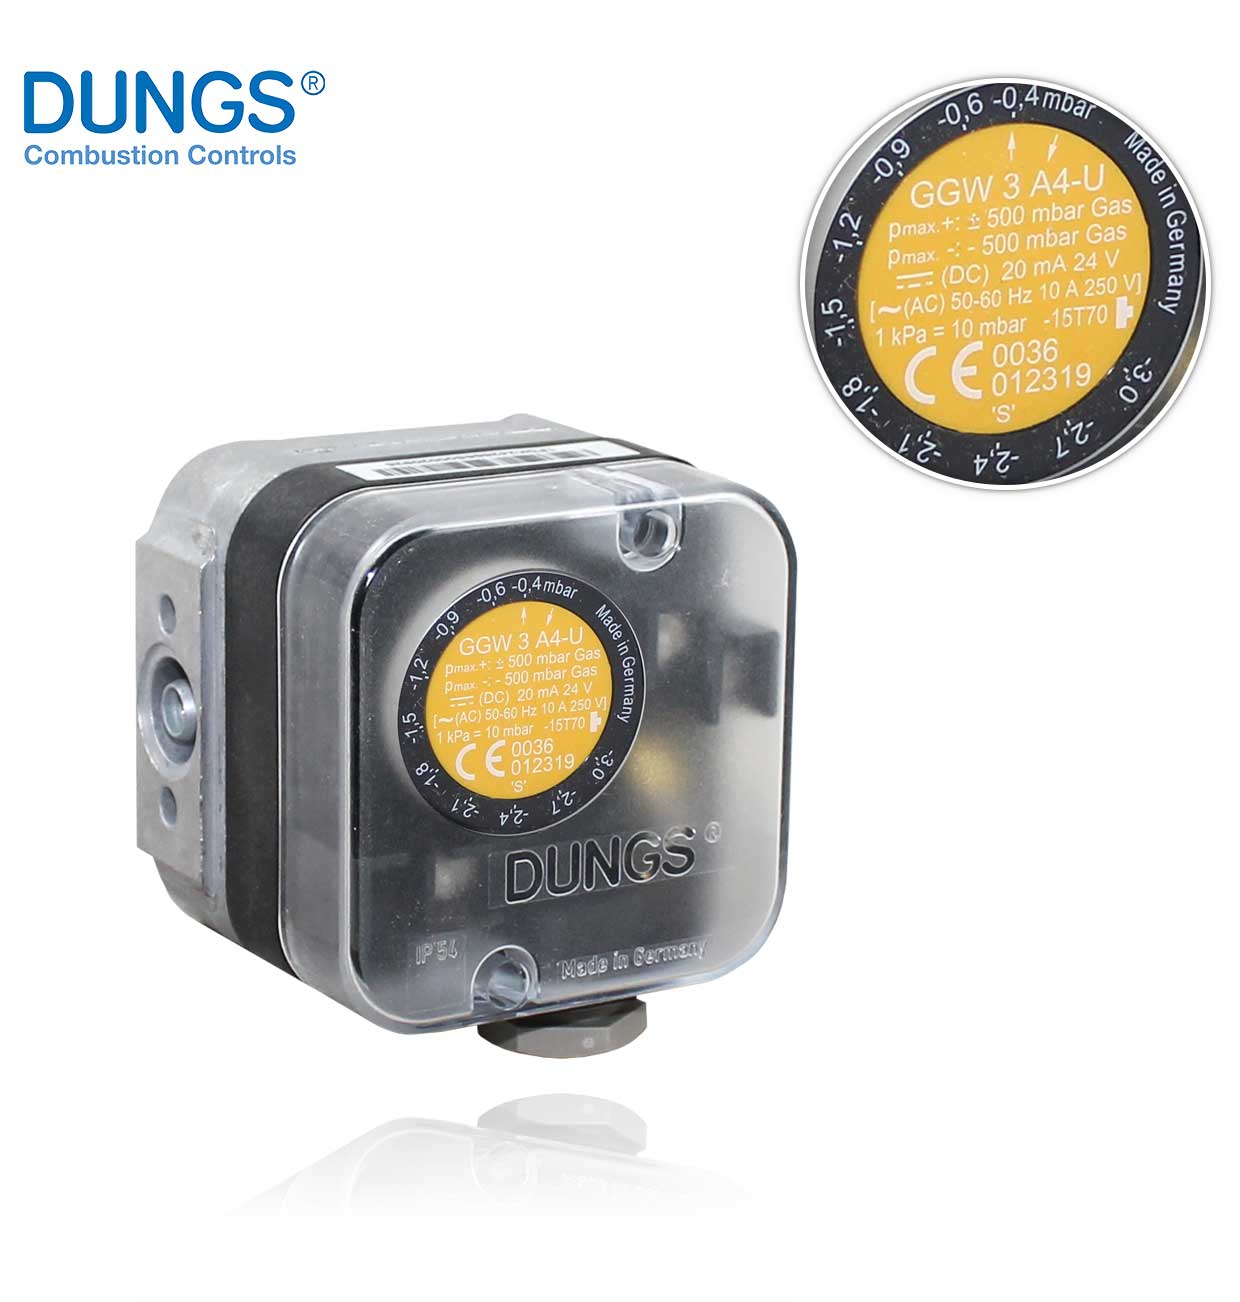 DUNGS 248327 GGW 3 A4 -0.4 A -3mbar FOR GAS AND/OR AIR NEGATIVE DIFFERENTIAL PRESSURE SWITCH